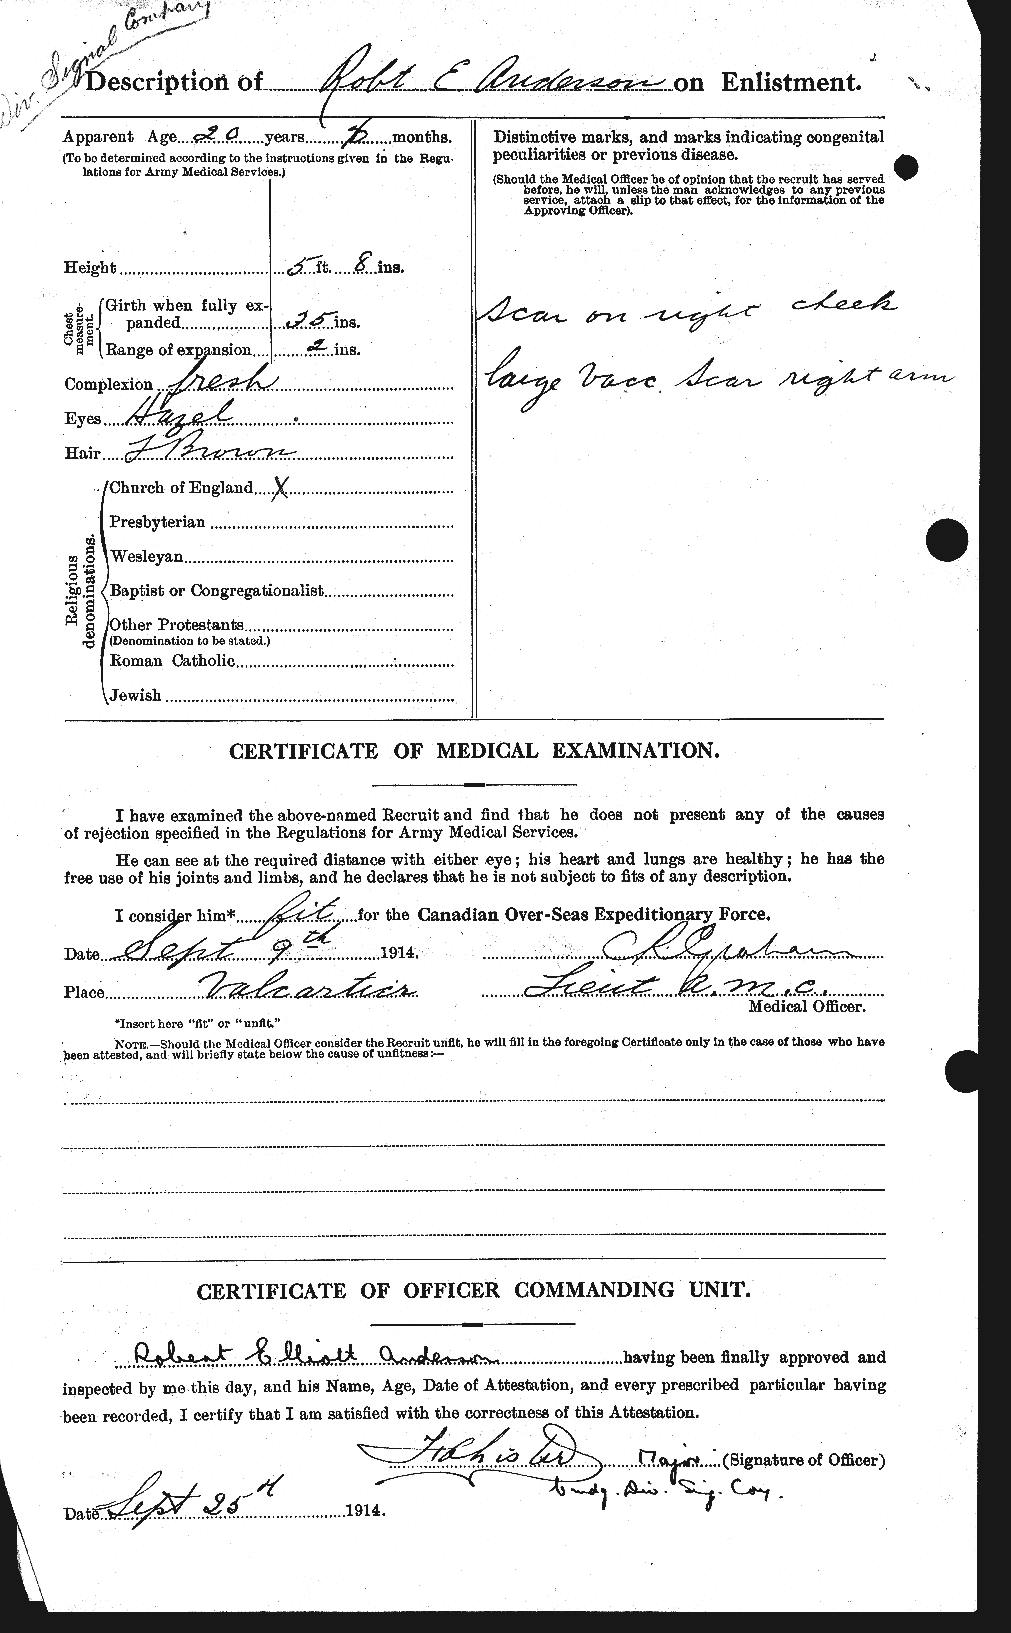 Personnel Records of the First World War - CEF 207261b